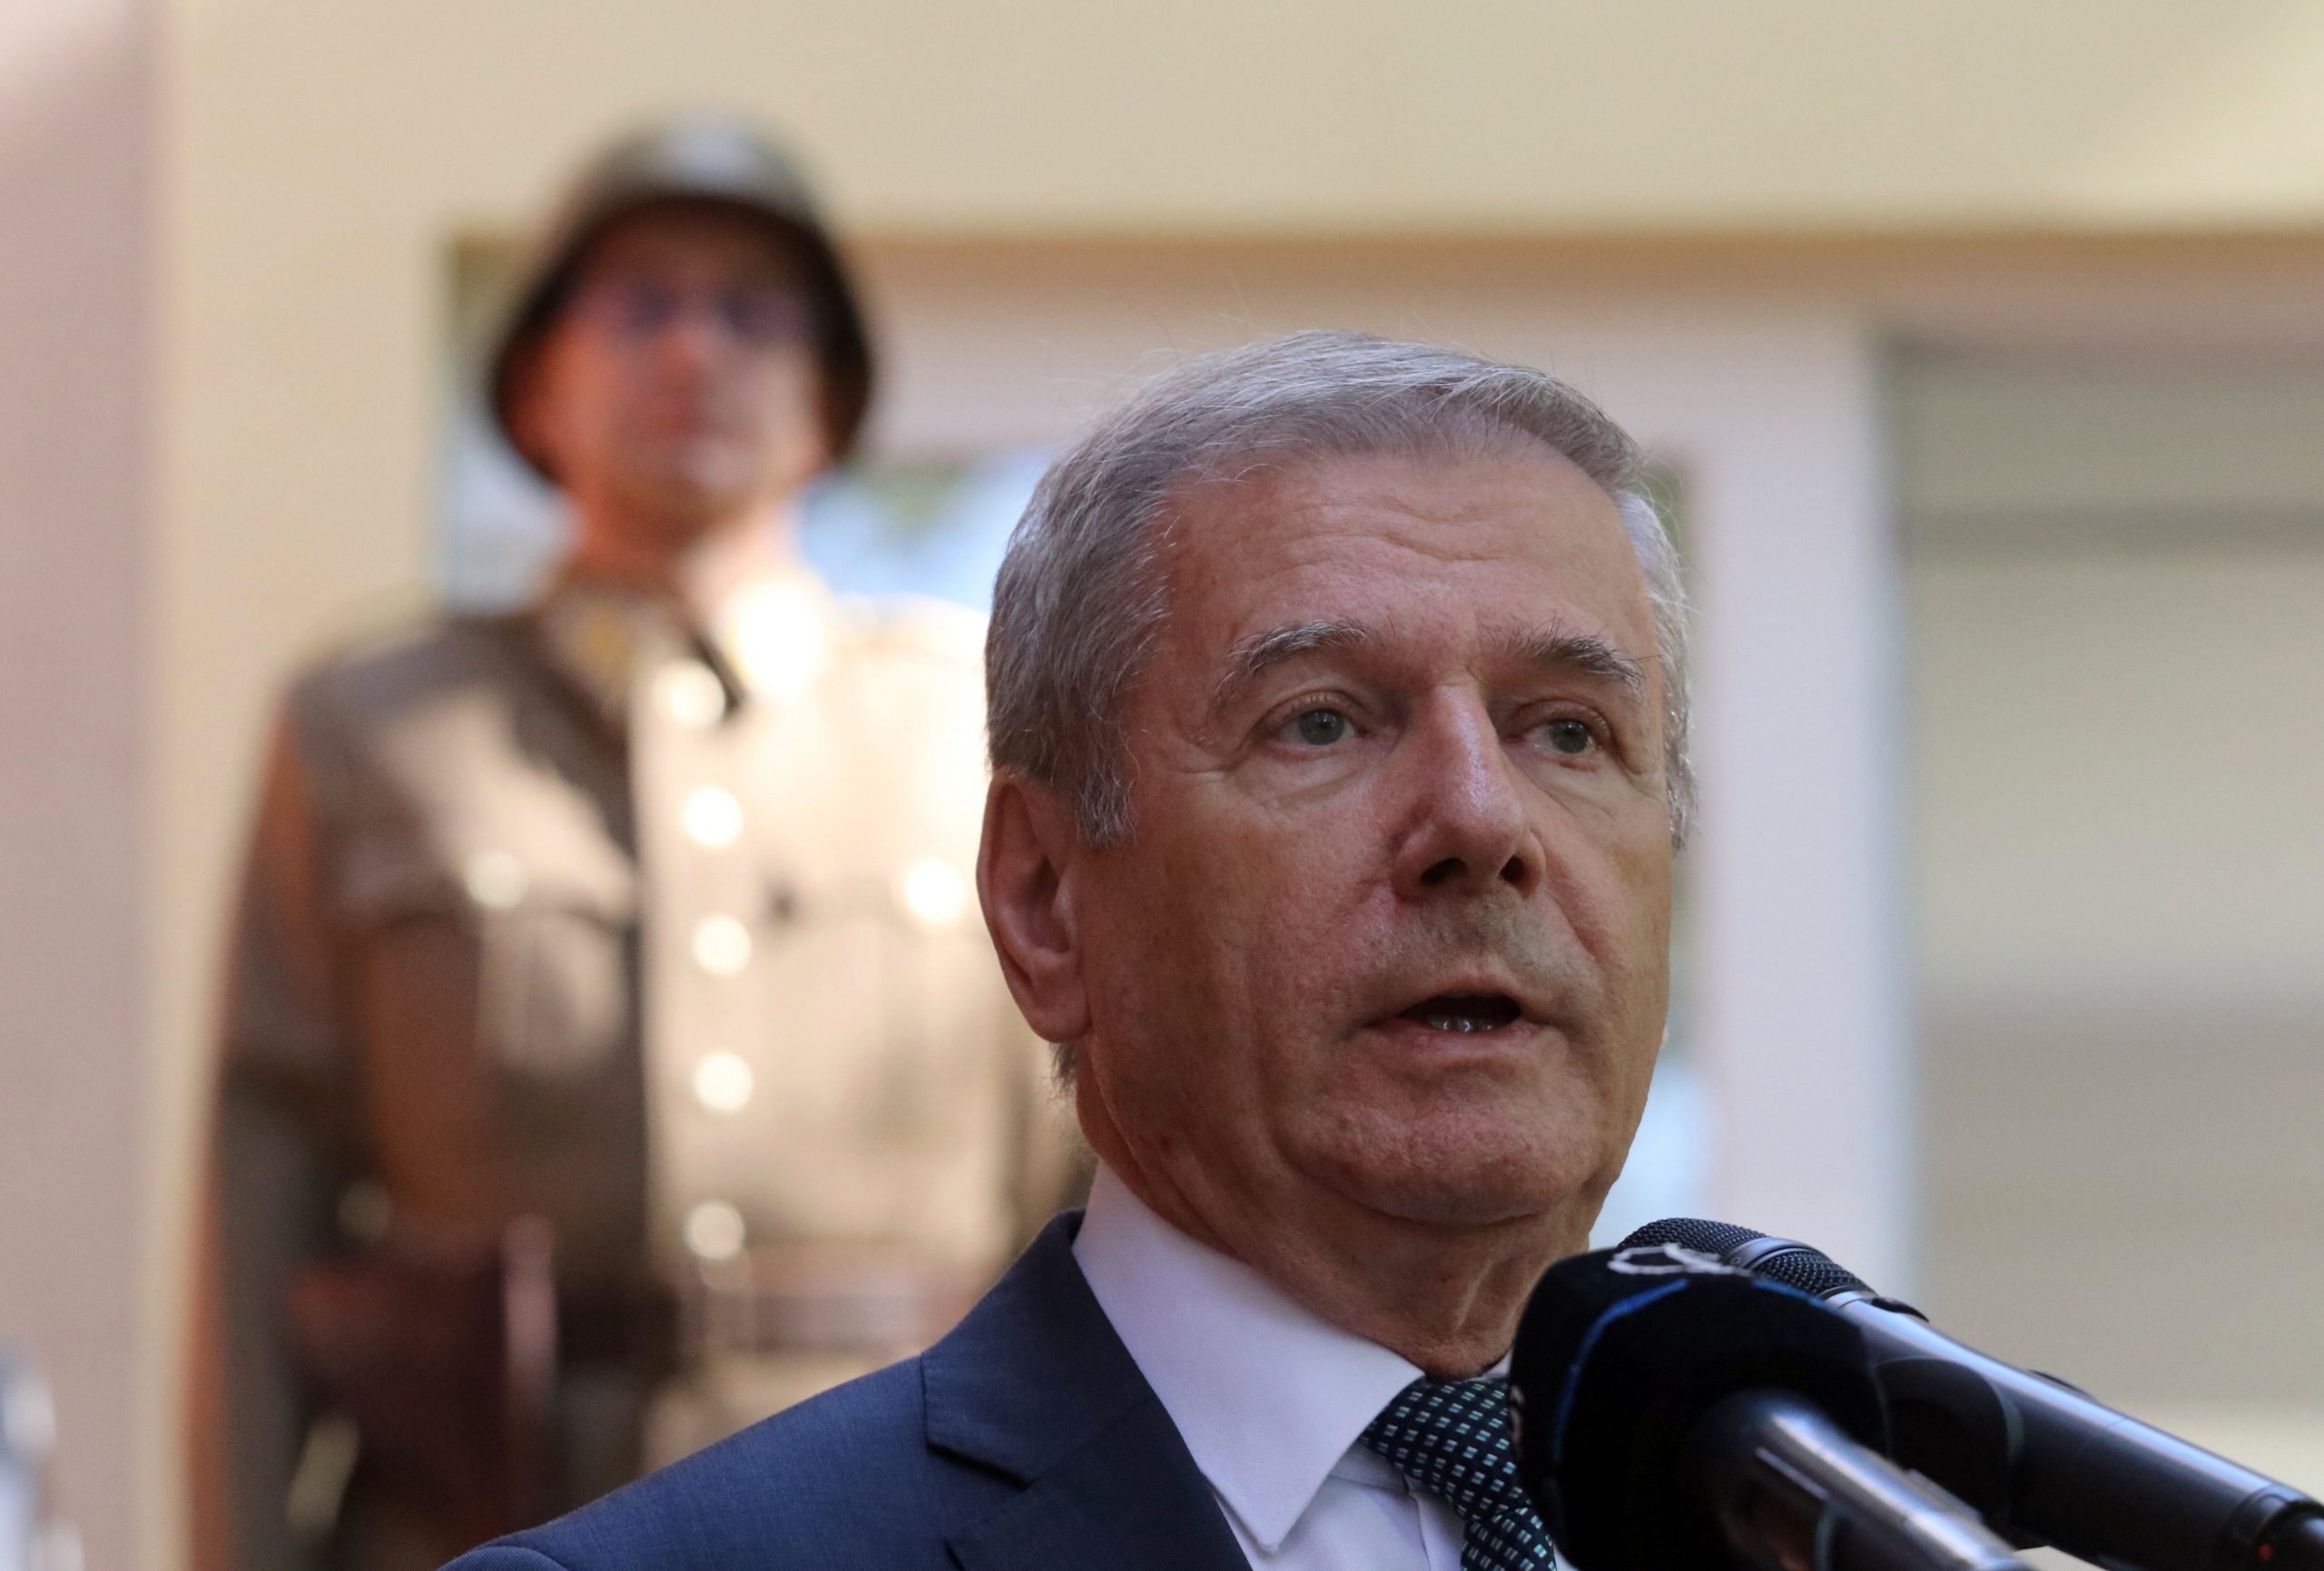 Defence Minister: Each Nation Must Guarantee Its Own Security